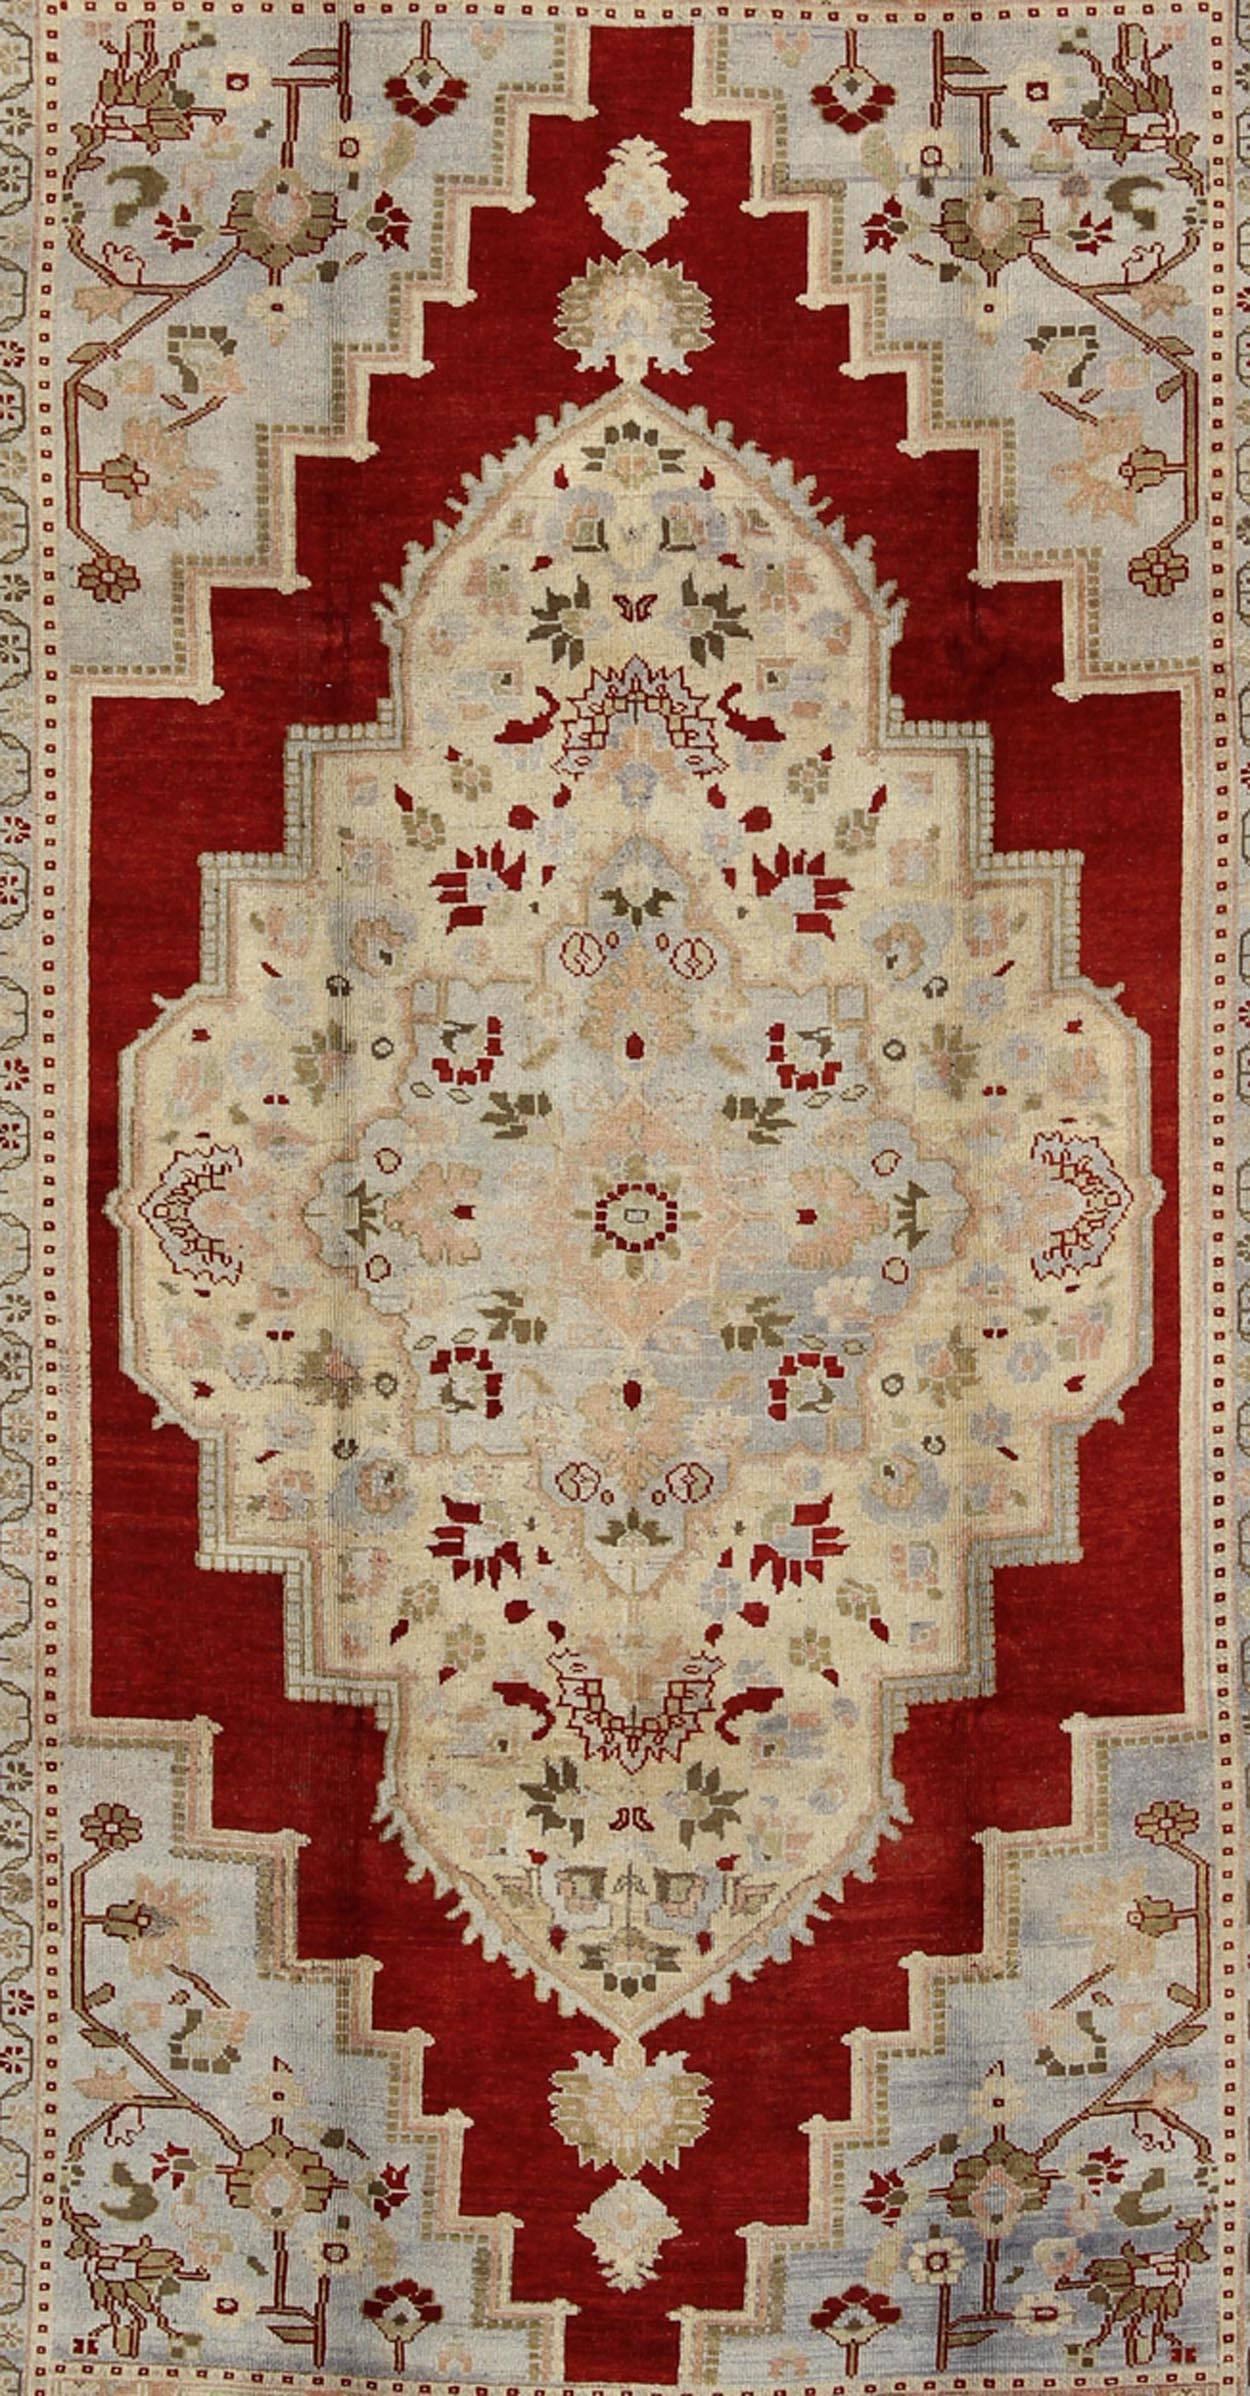 Hand-Knotted Beautiful Red Background Turkish Vintage Oushak Rug Blue Corners & Greed Border For Sale